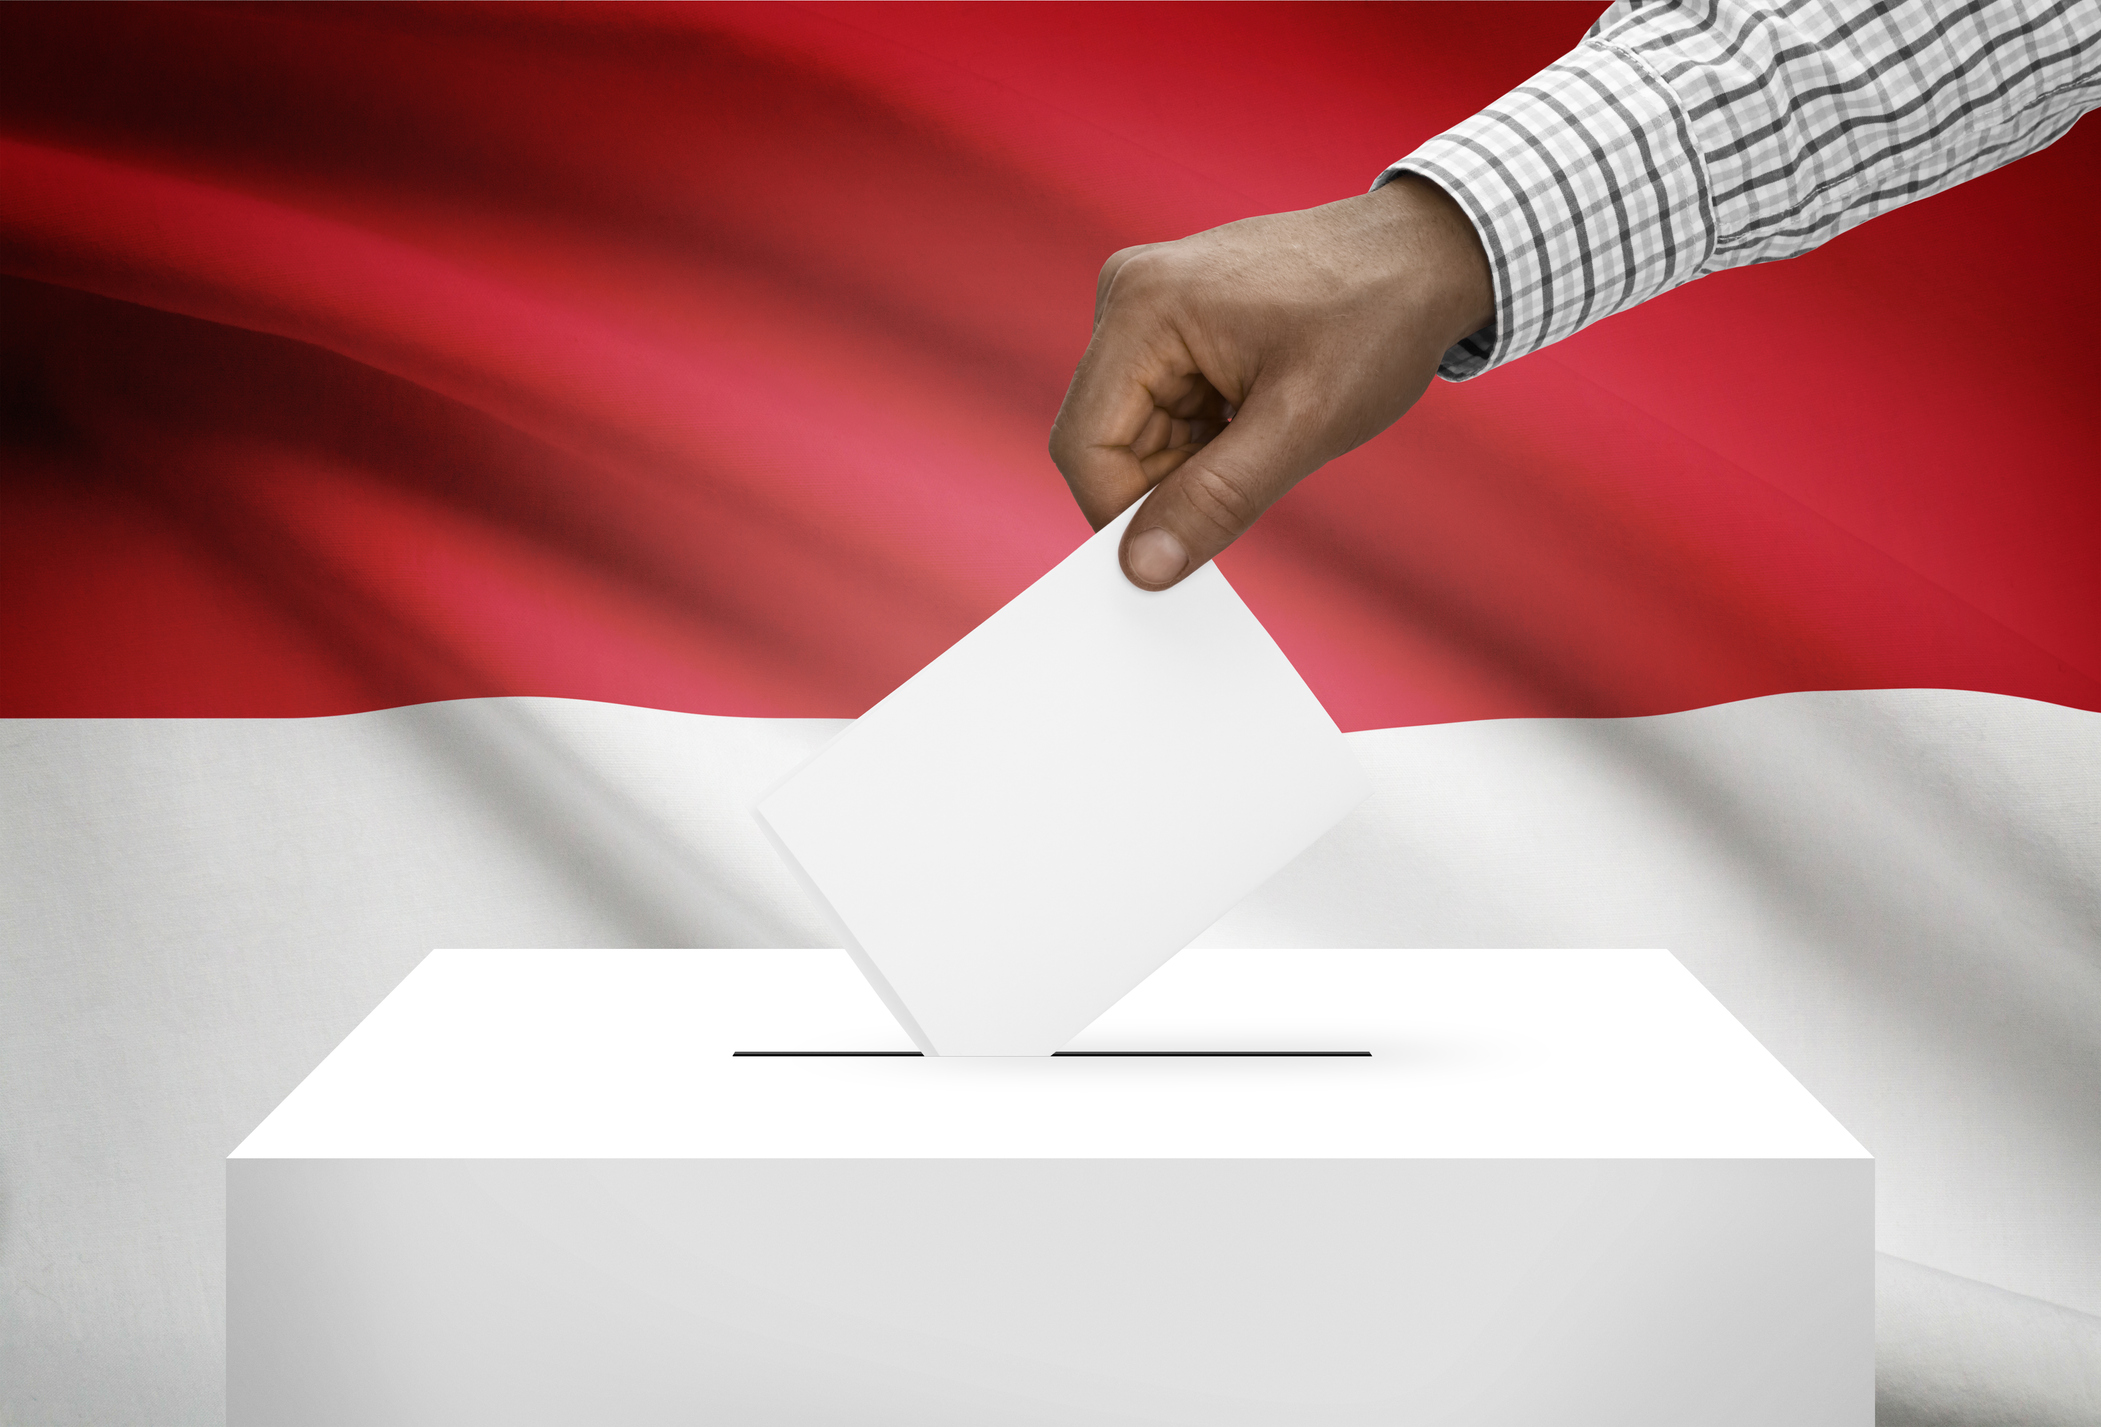 Ballot box with national flag on background - Indonesia